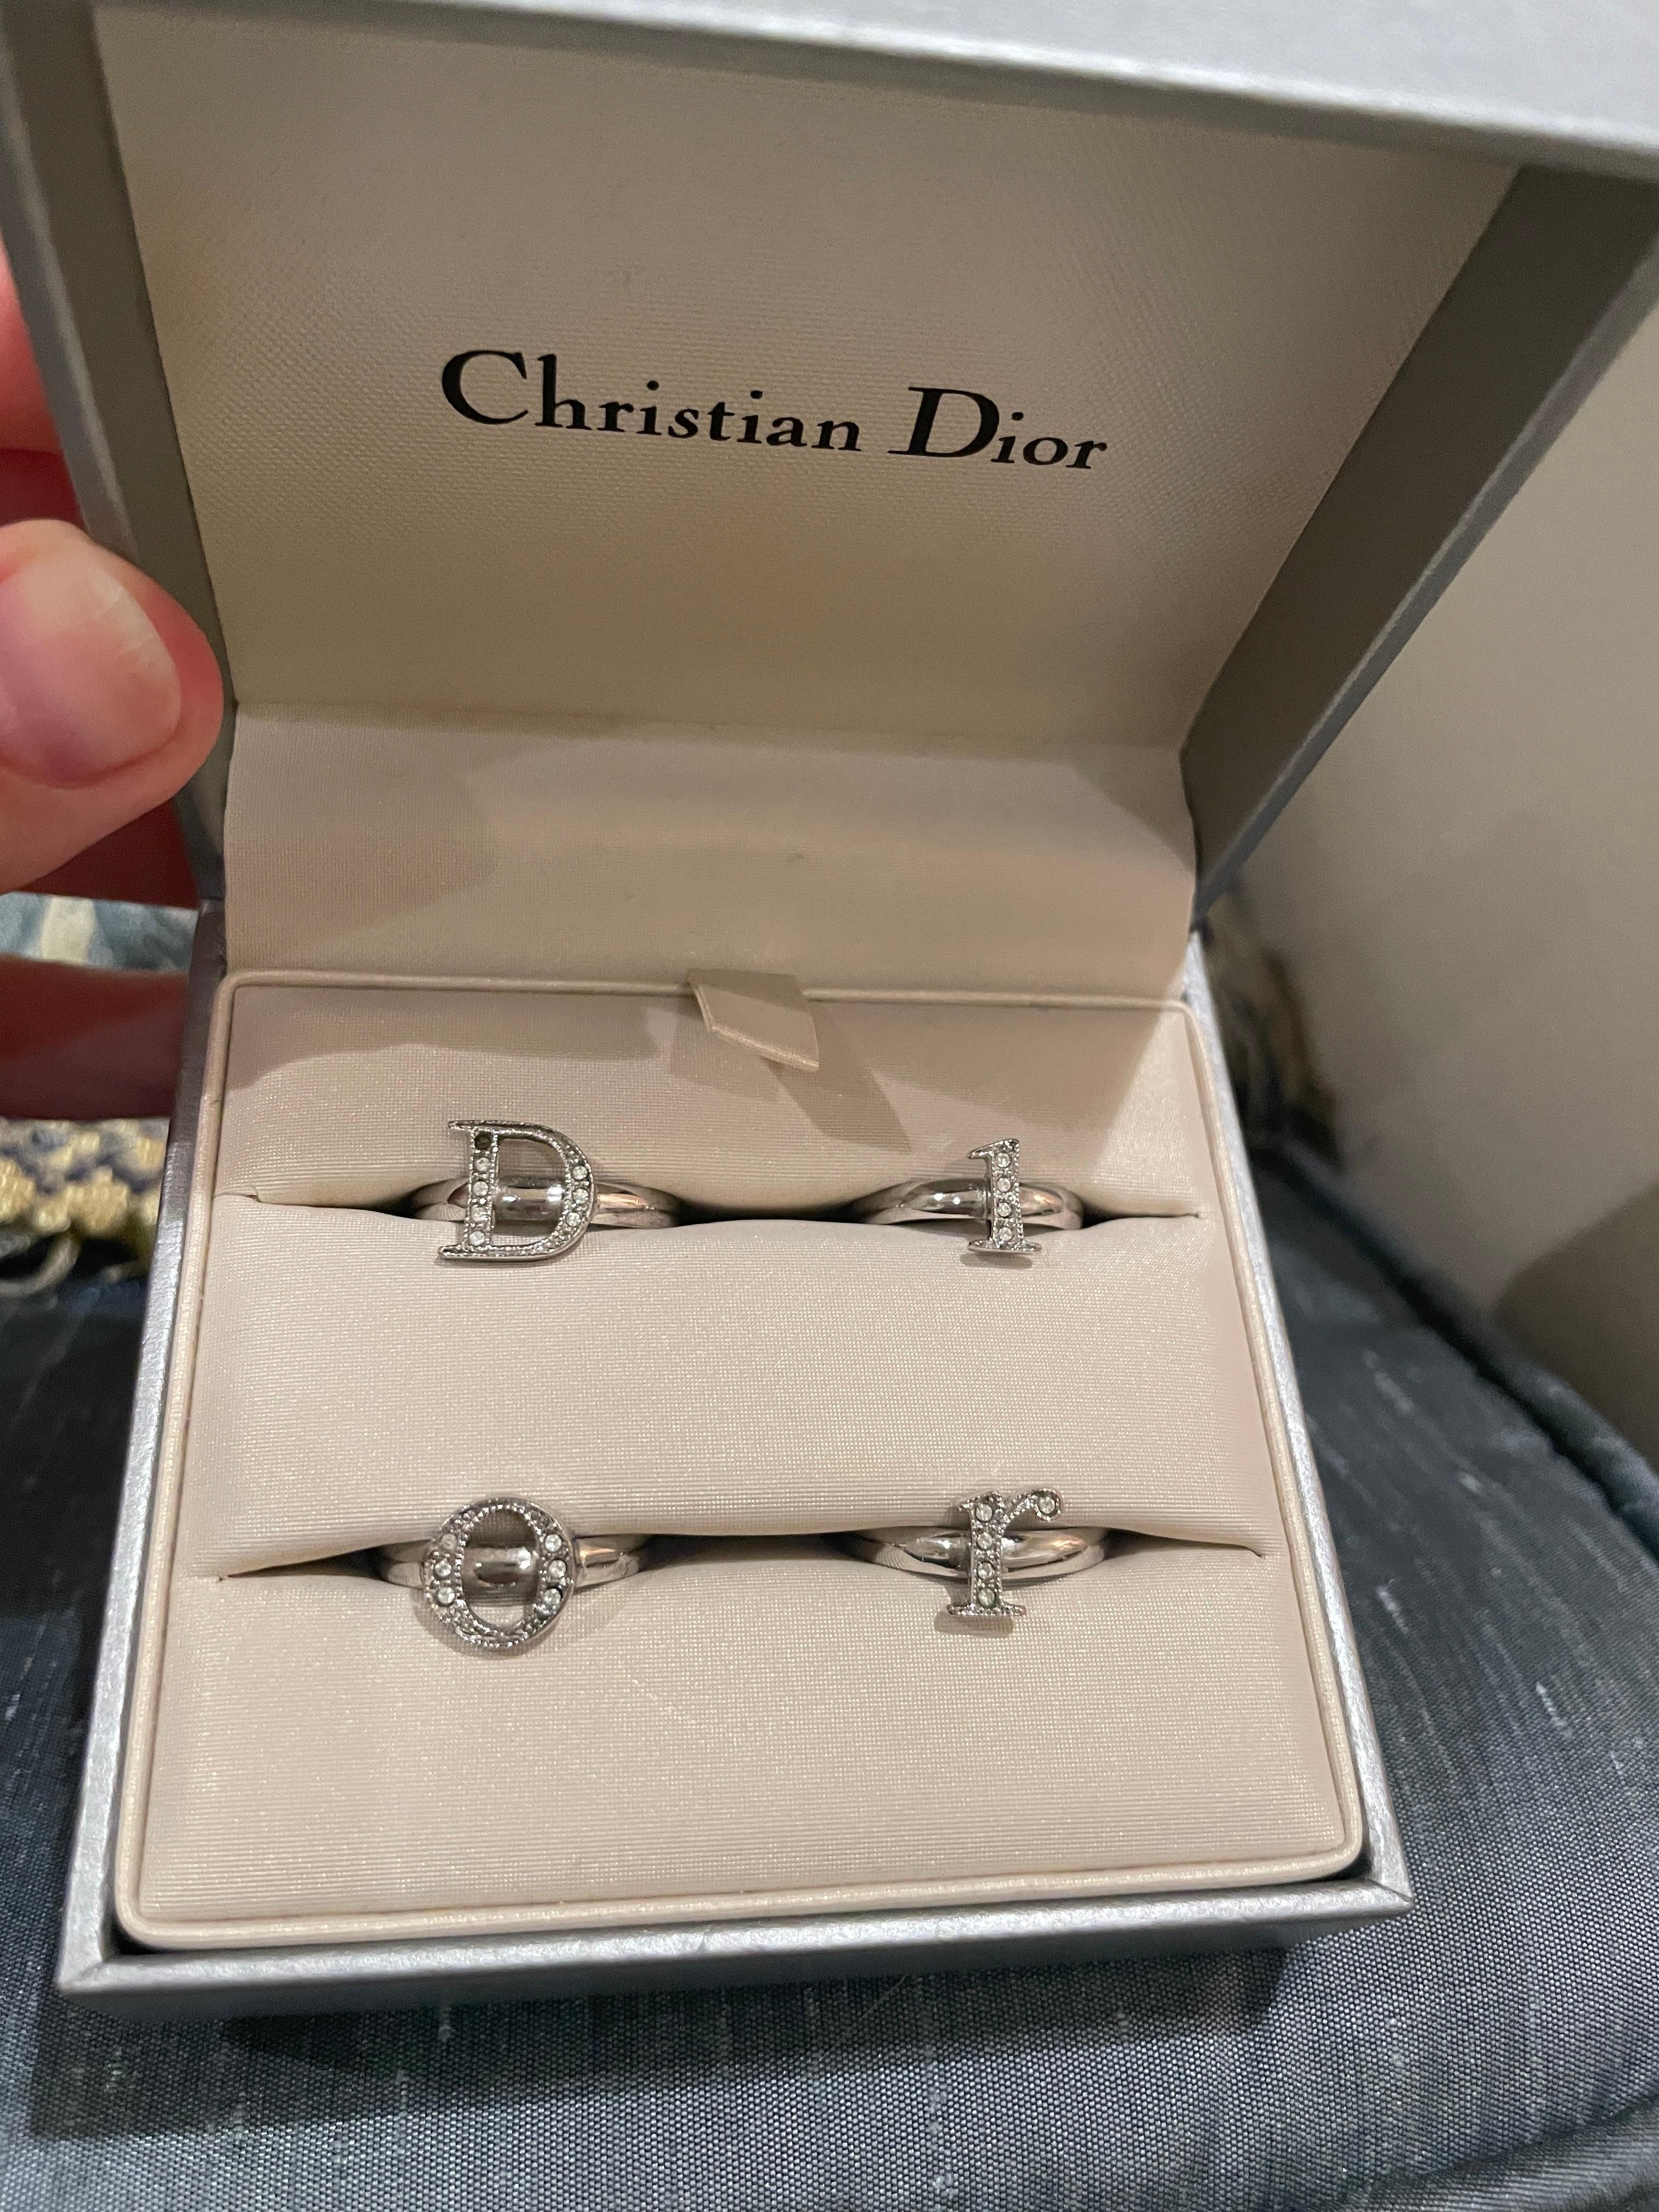 DIOR crystal spell out rings. Vintage Galliano Christian Dior spell out rings! Used vintage condition. 1 rhinestone is missing from the D as pictured (but that's nothing a Swarovski crystal plus some glue can't fix). These are silver and adjustable.